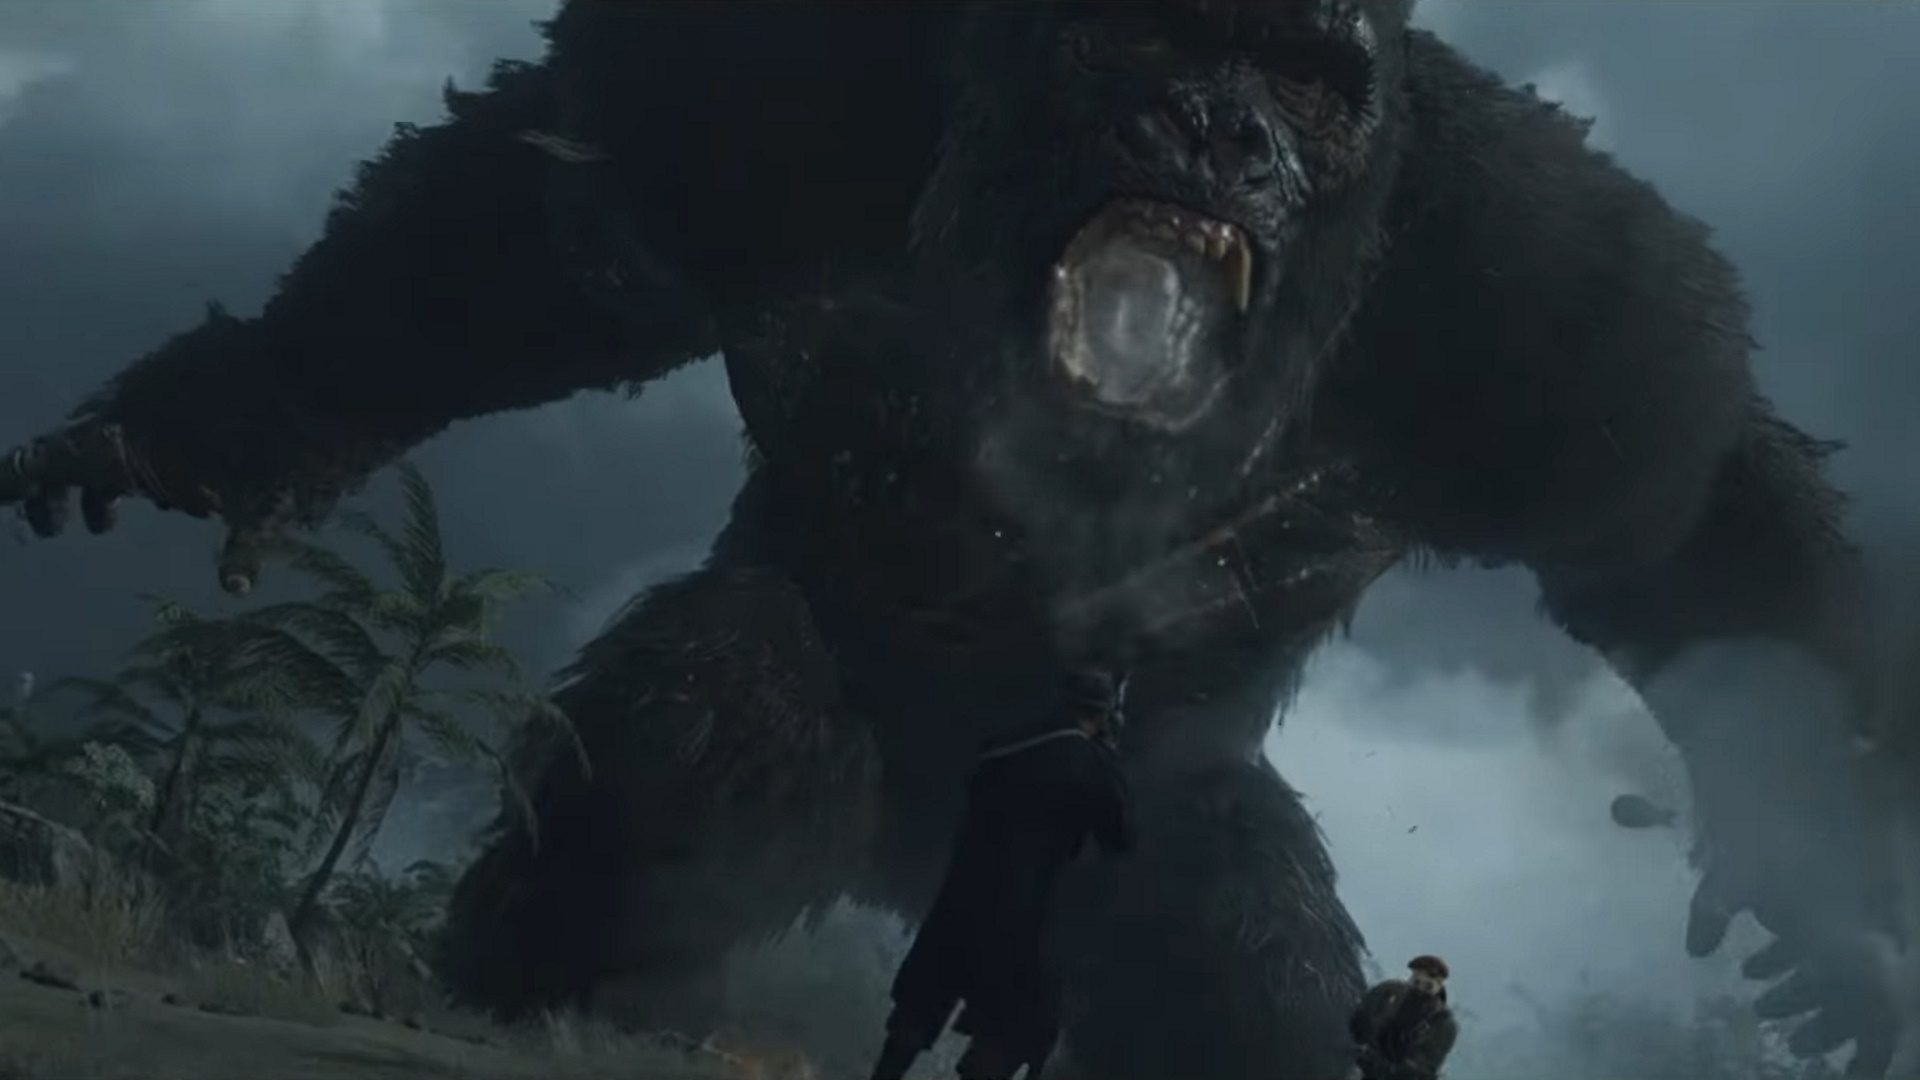 King Kong faces down a guy with a gun in the new Warzone update